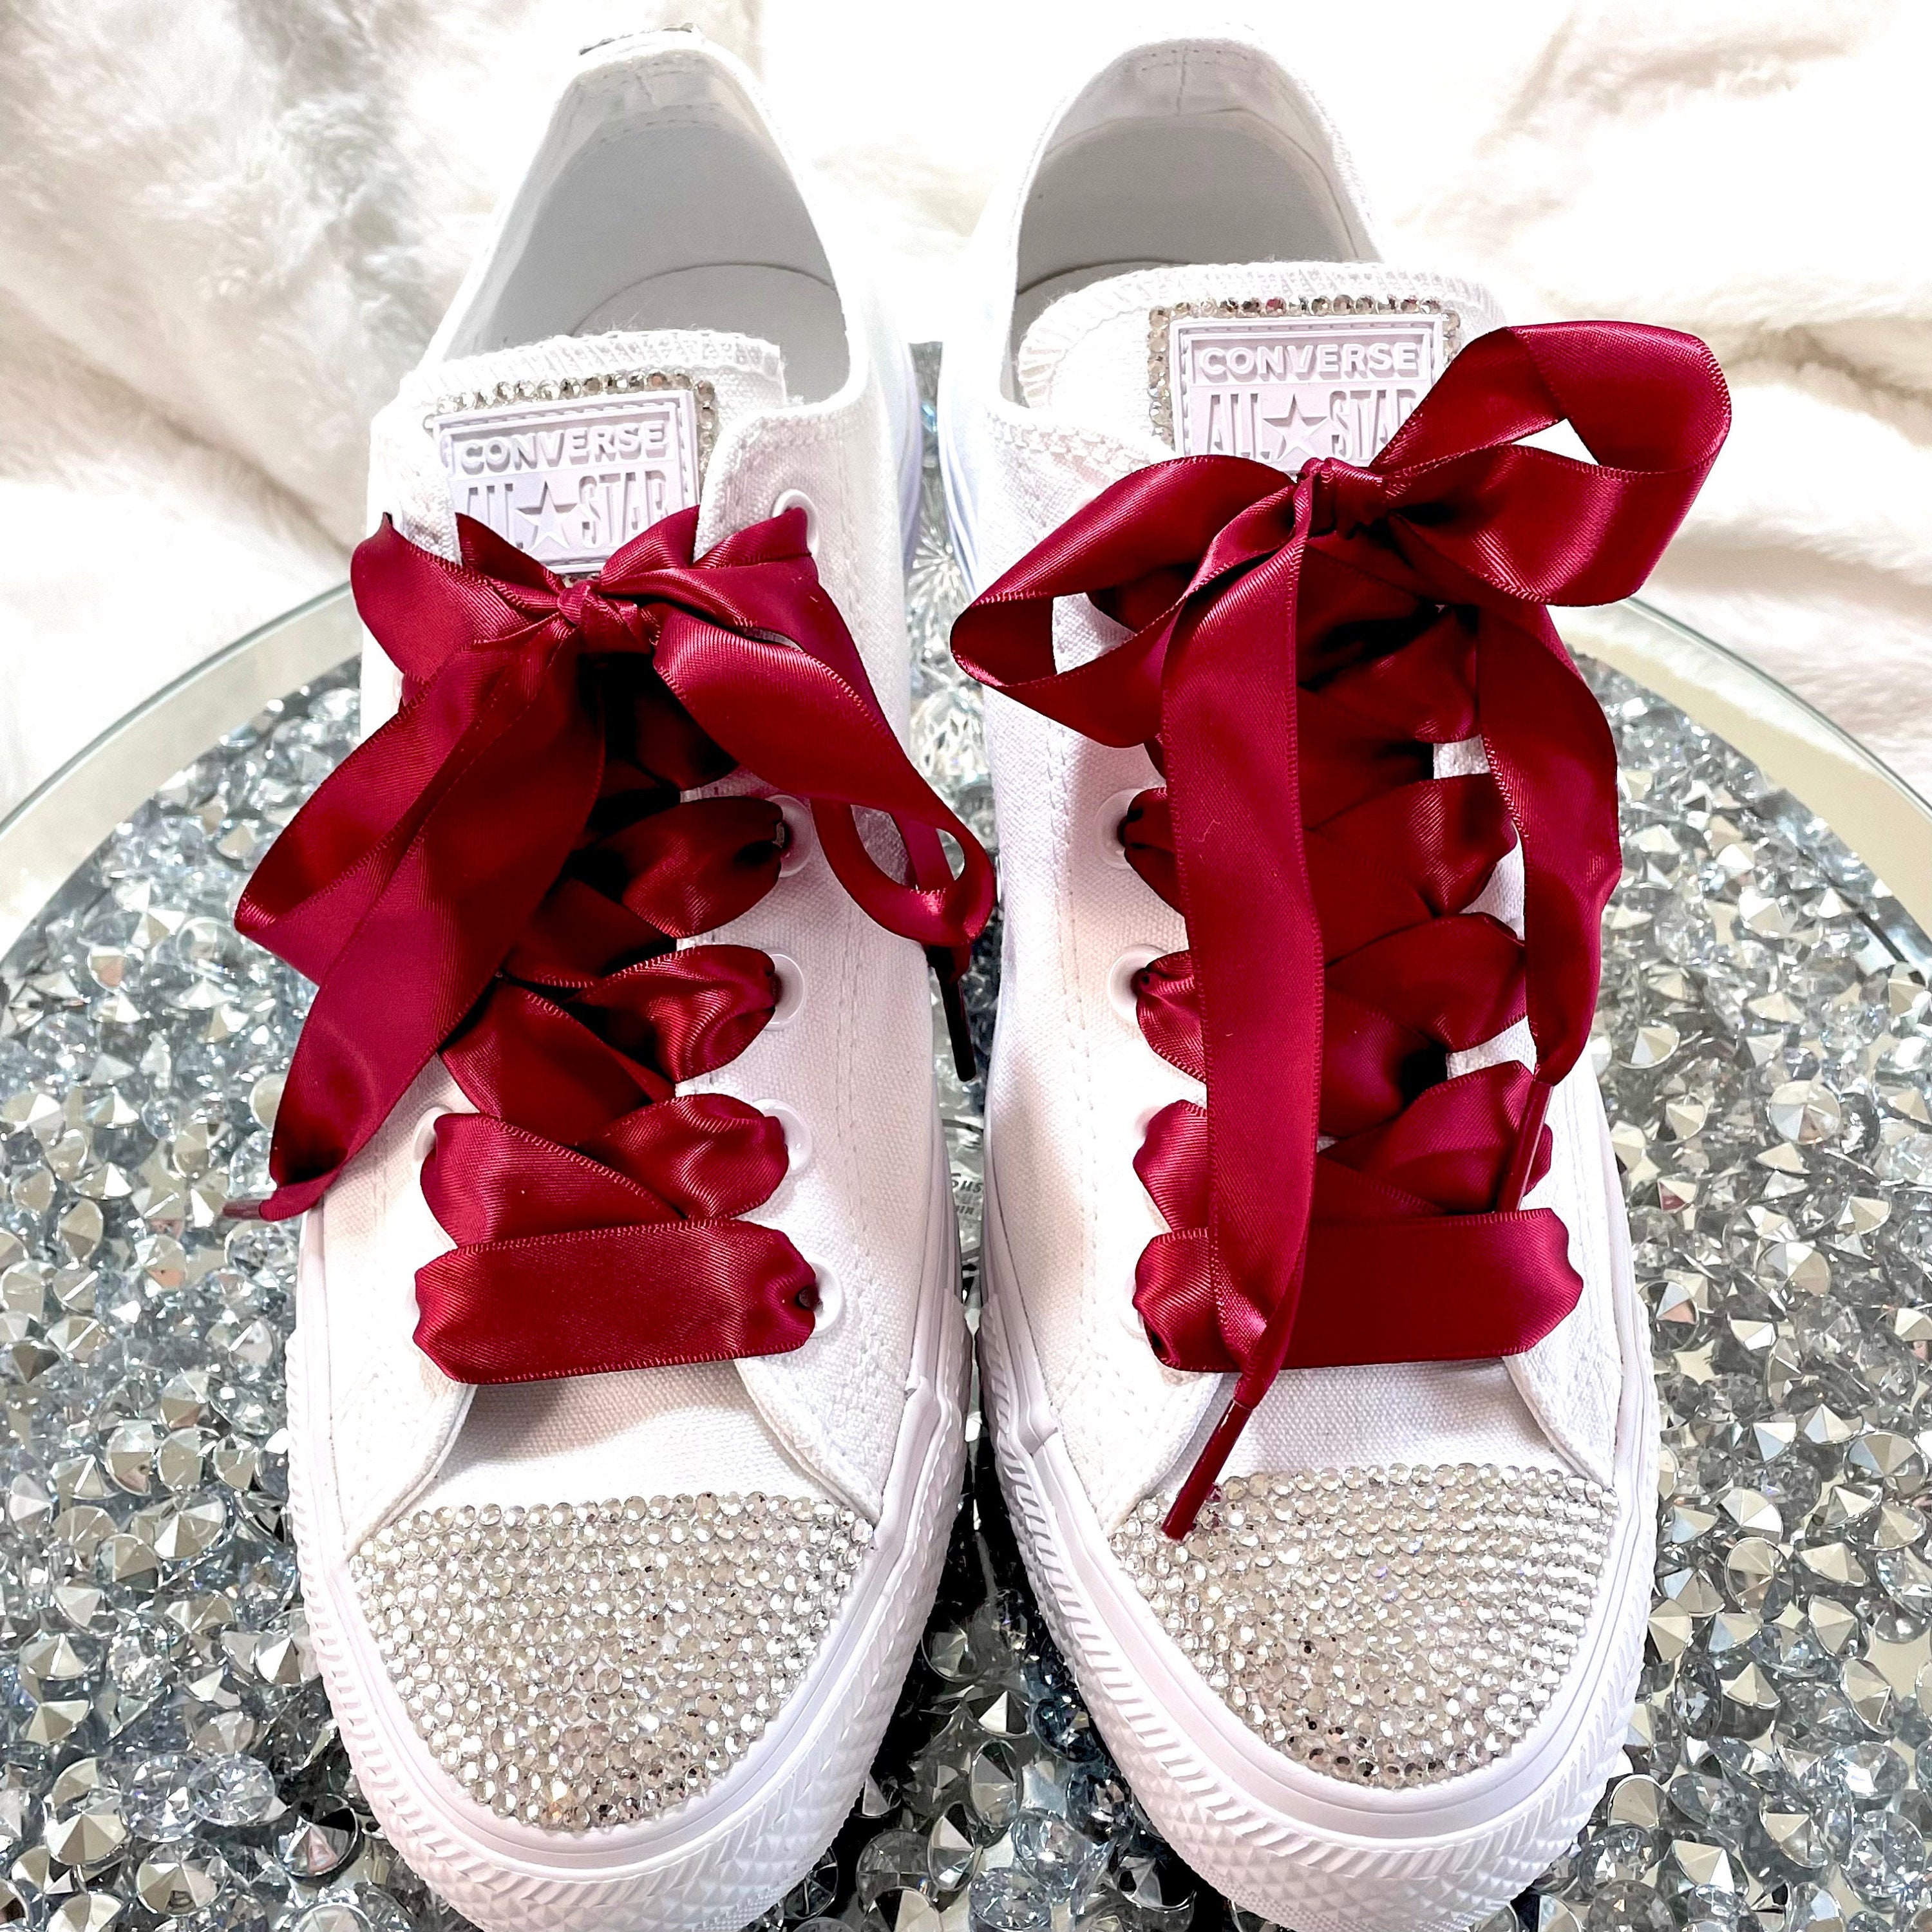 Red and White BLING Women Clog Shoes. Rhinestone Embellished 